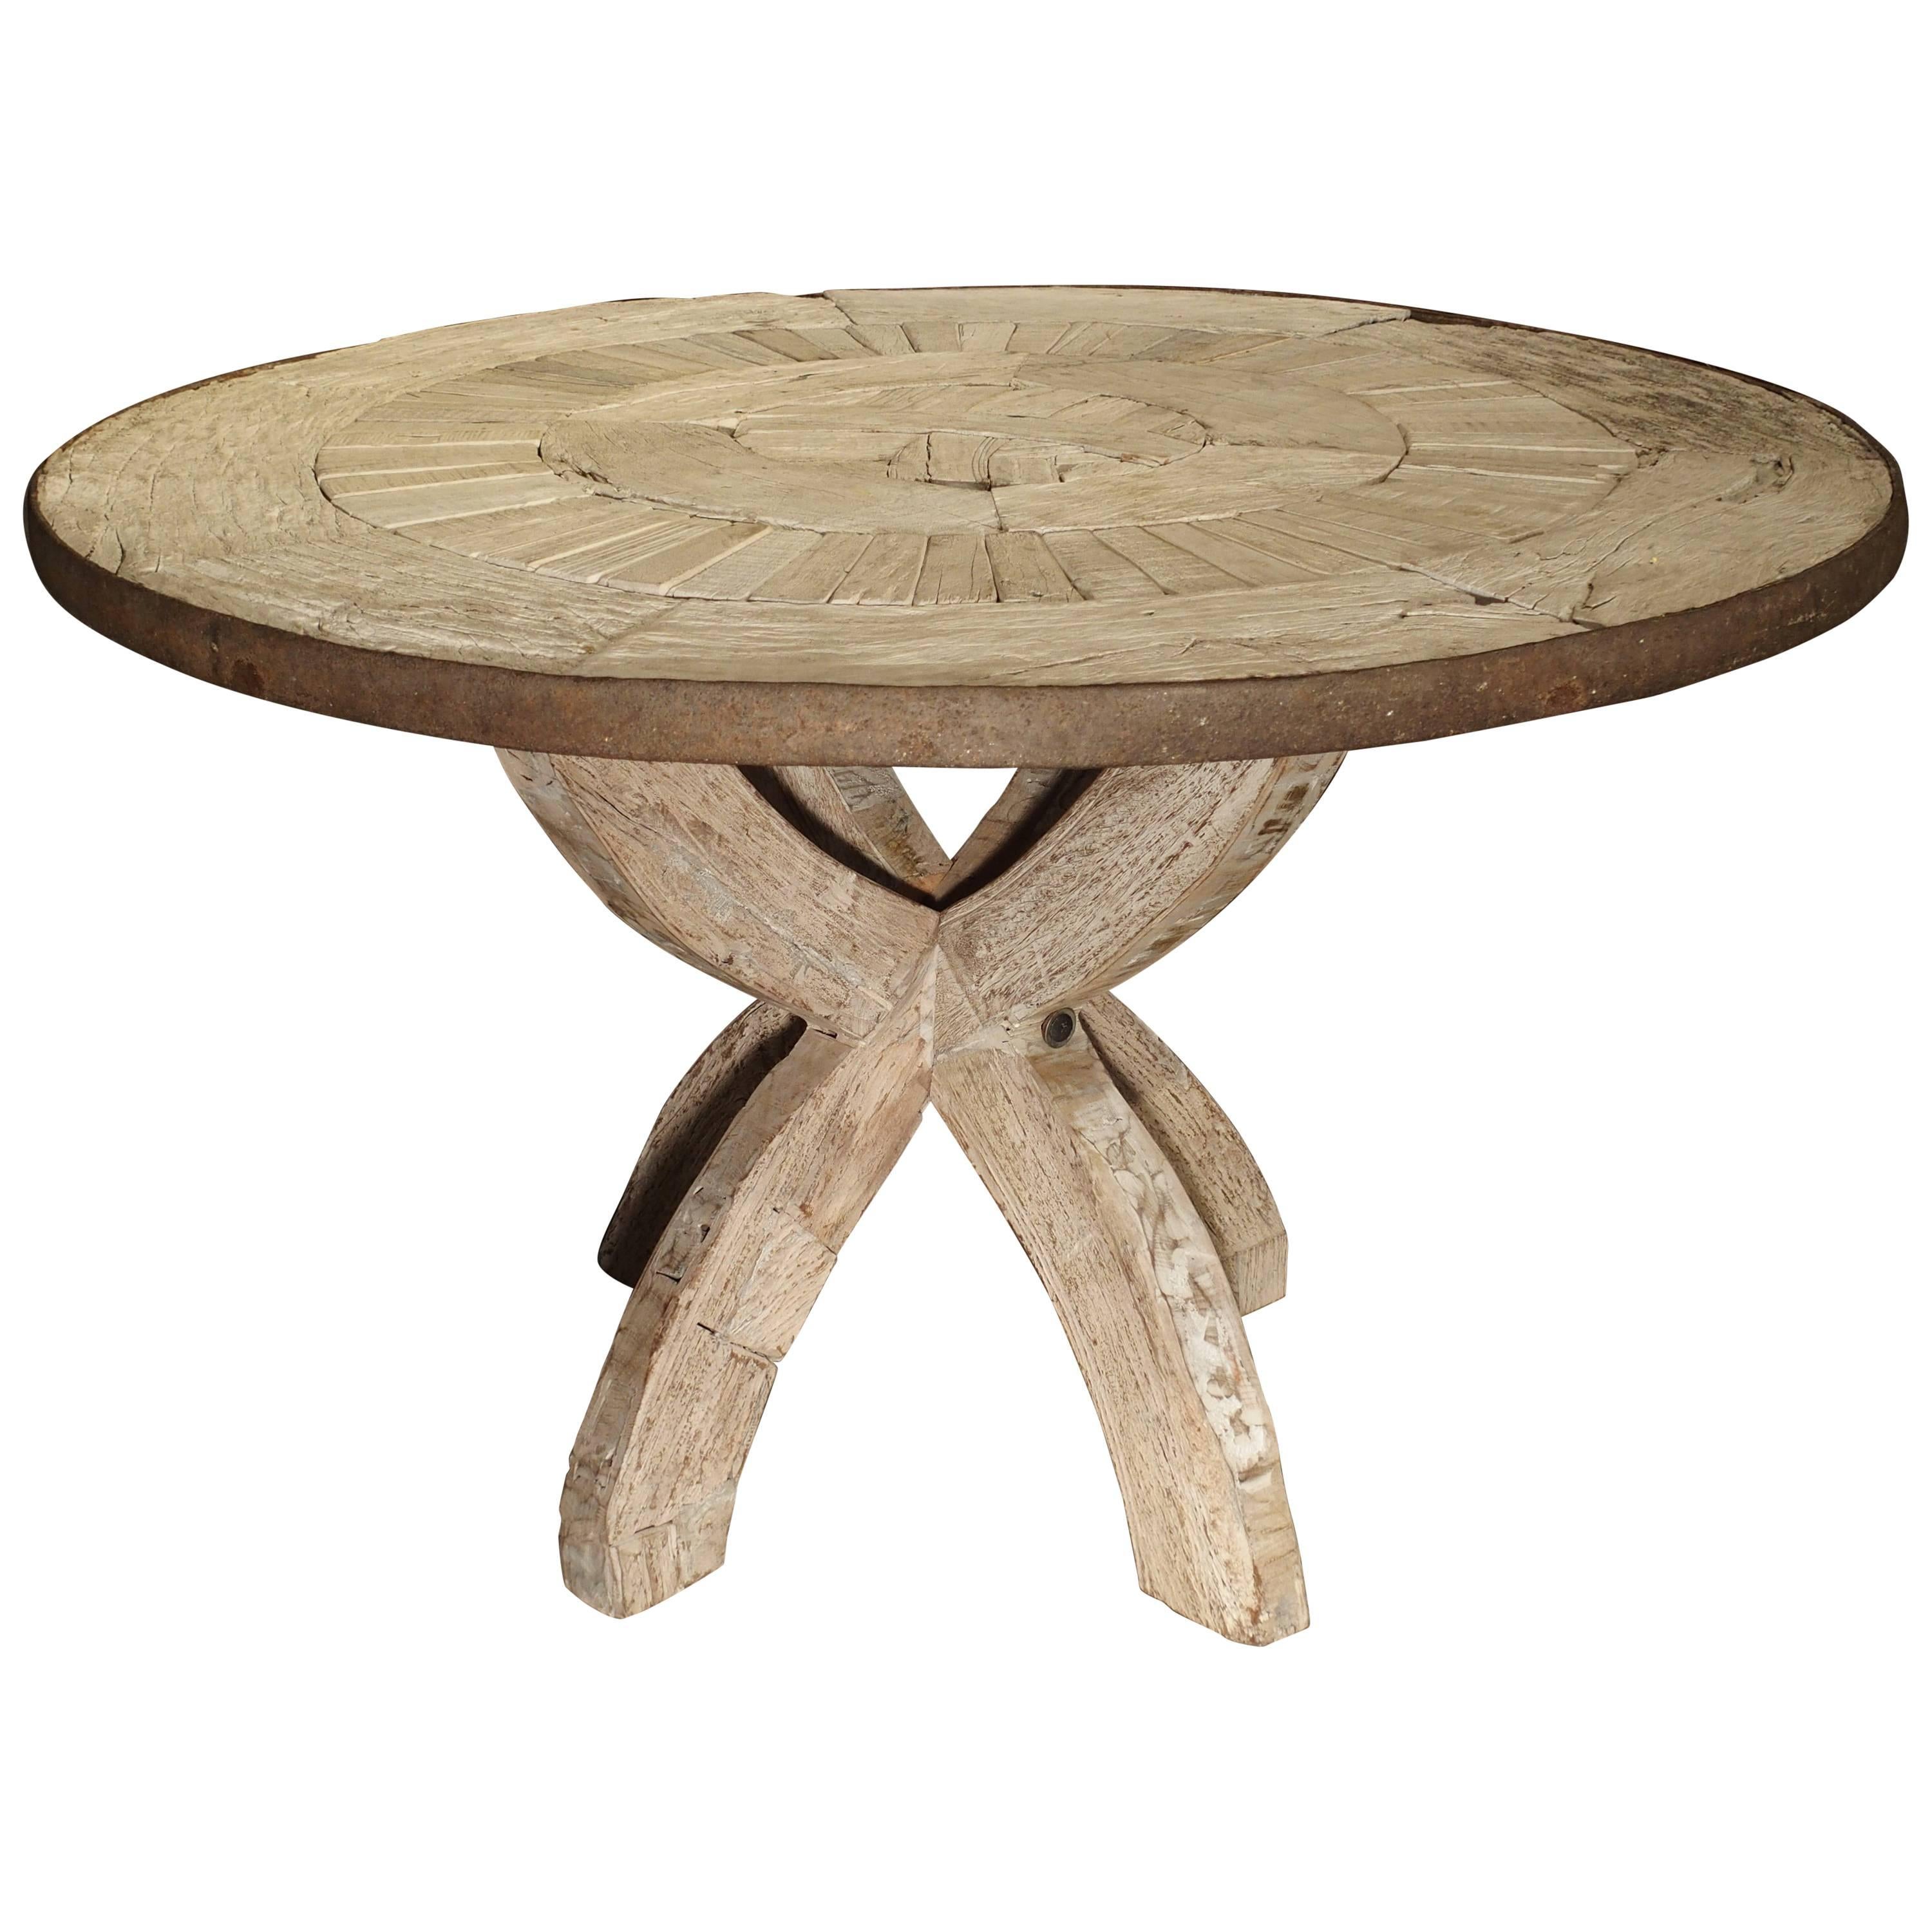 Round Table from France Made of Salvaged Wood and Iron